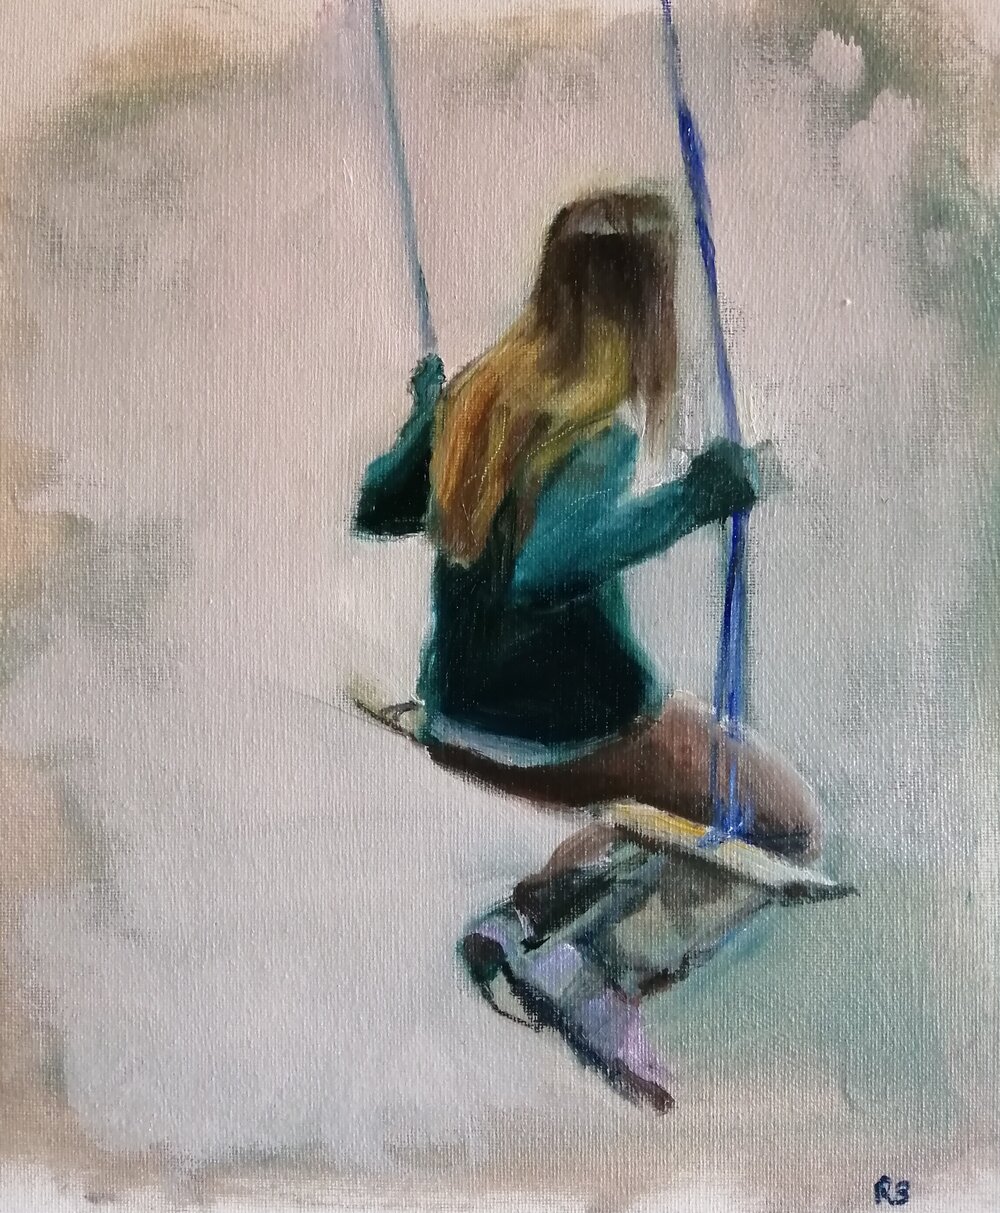  Girl on a swing  2020  Oil on board  26x31 cm  SOLD  An  painting of a thoughtful girl on a swing 